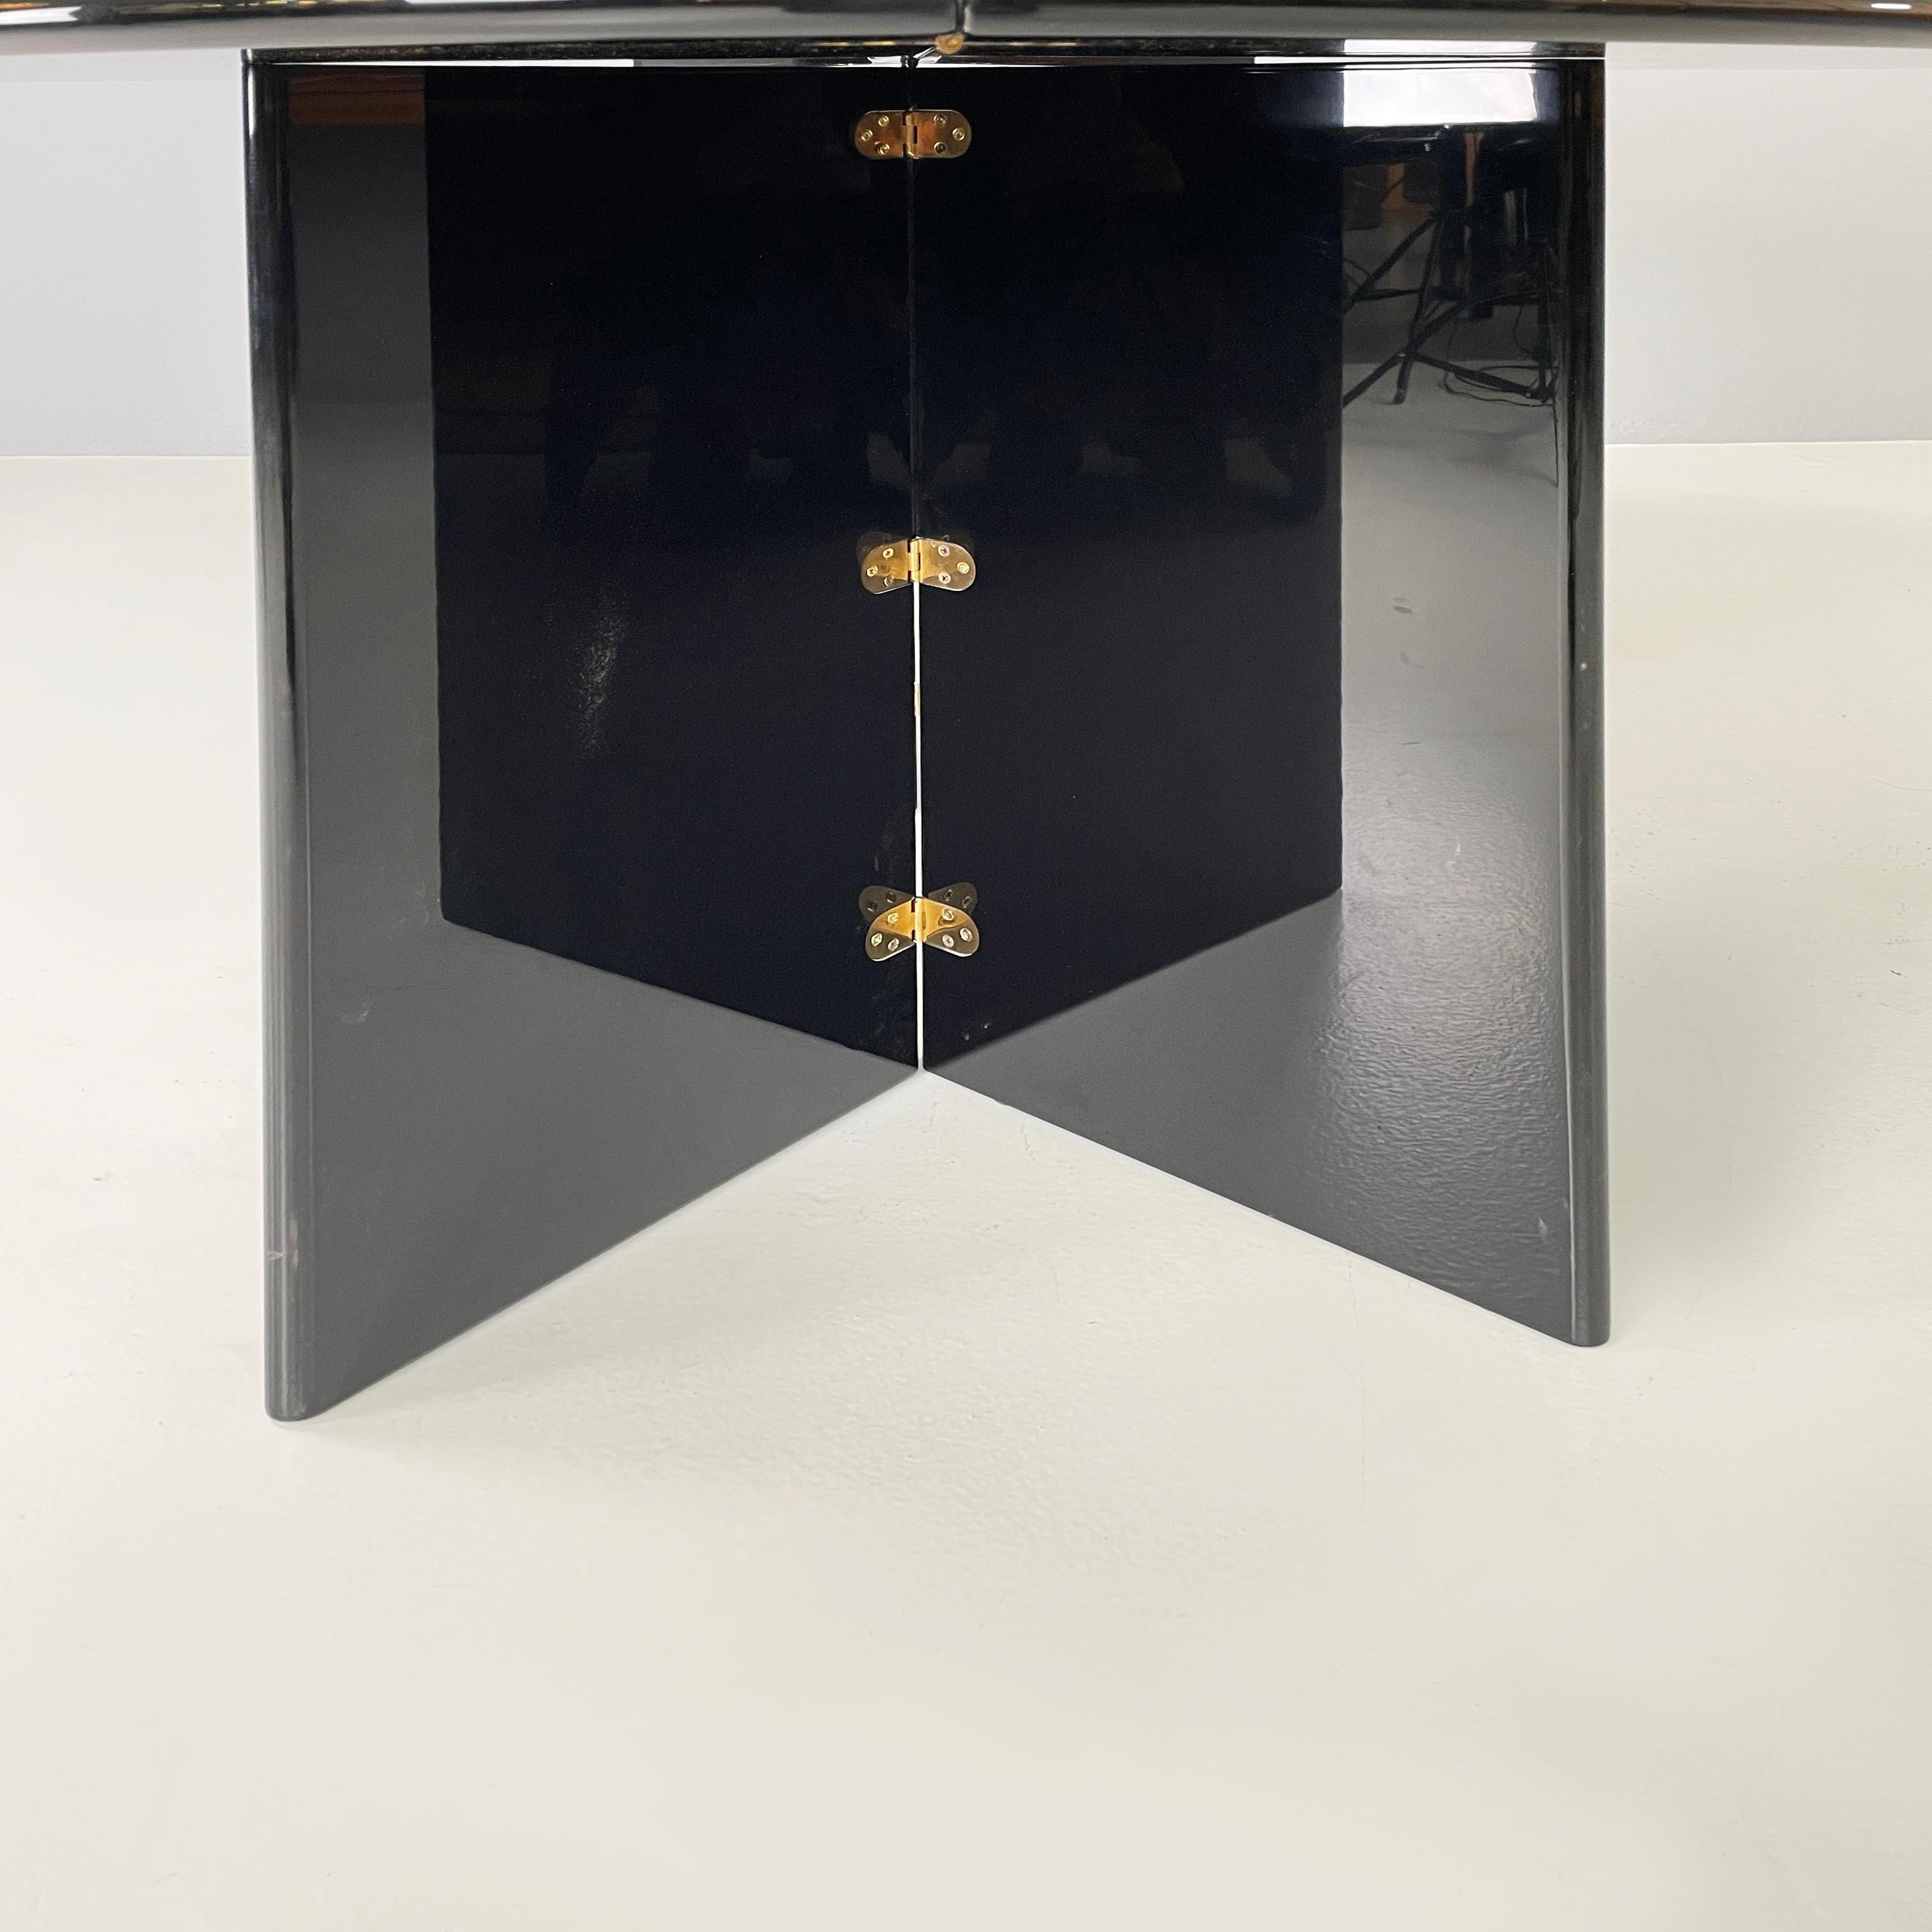 Italian modern Black Dining table or console by Takahama for Cassina, 1970s For Sale 7